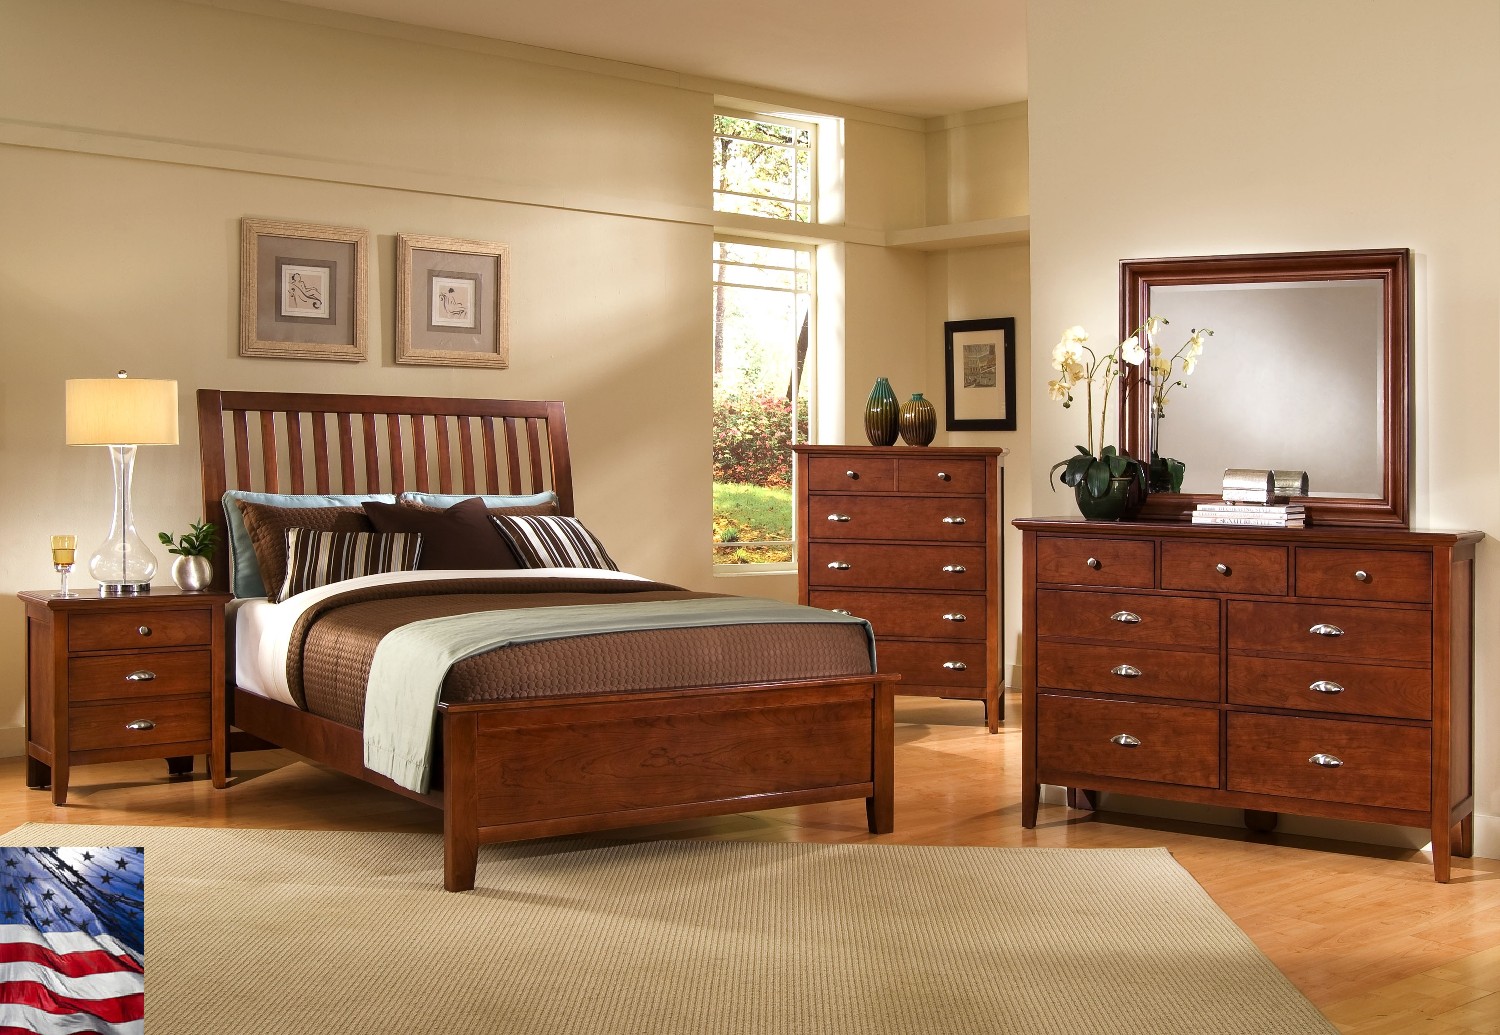 white and brown furniture in bedroom ideas